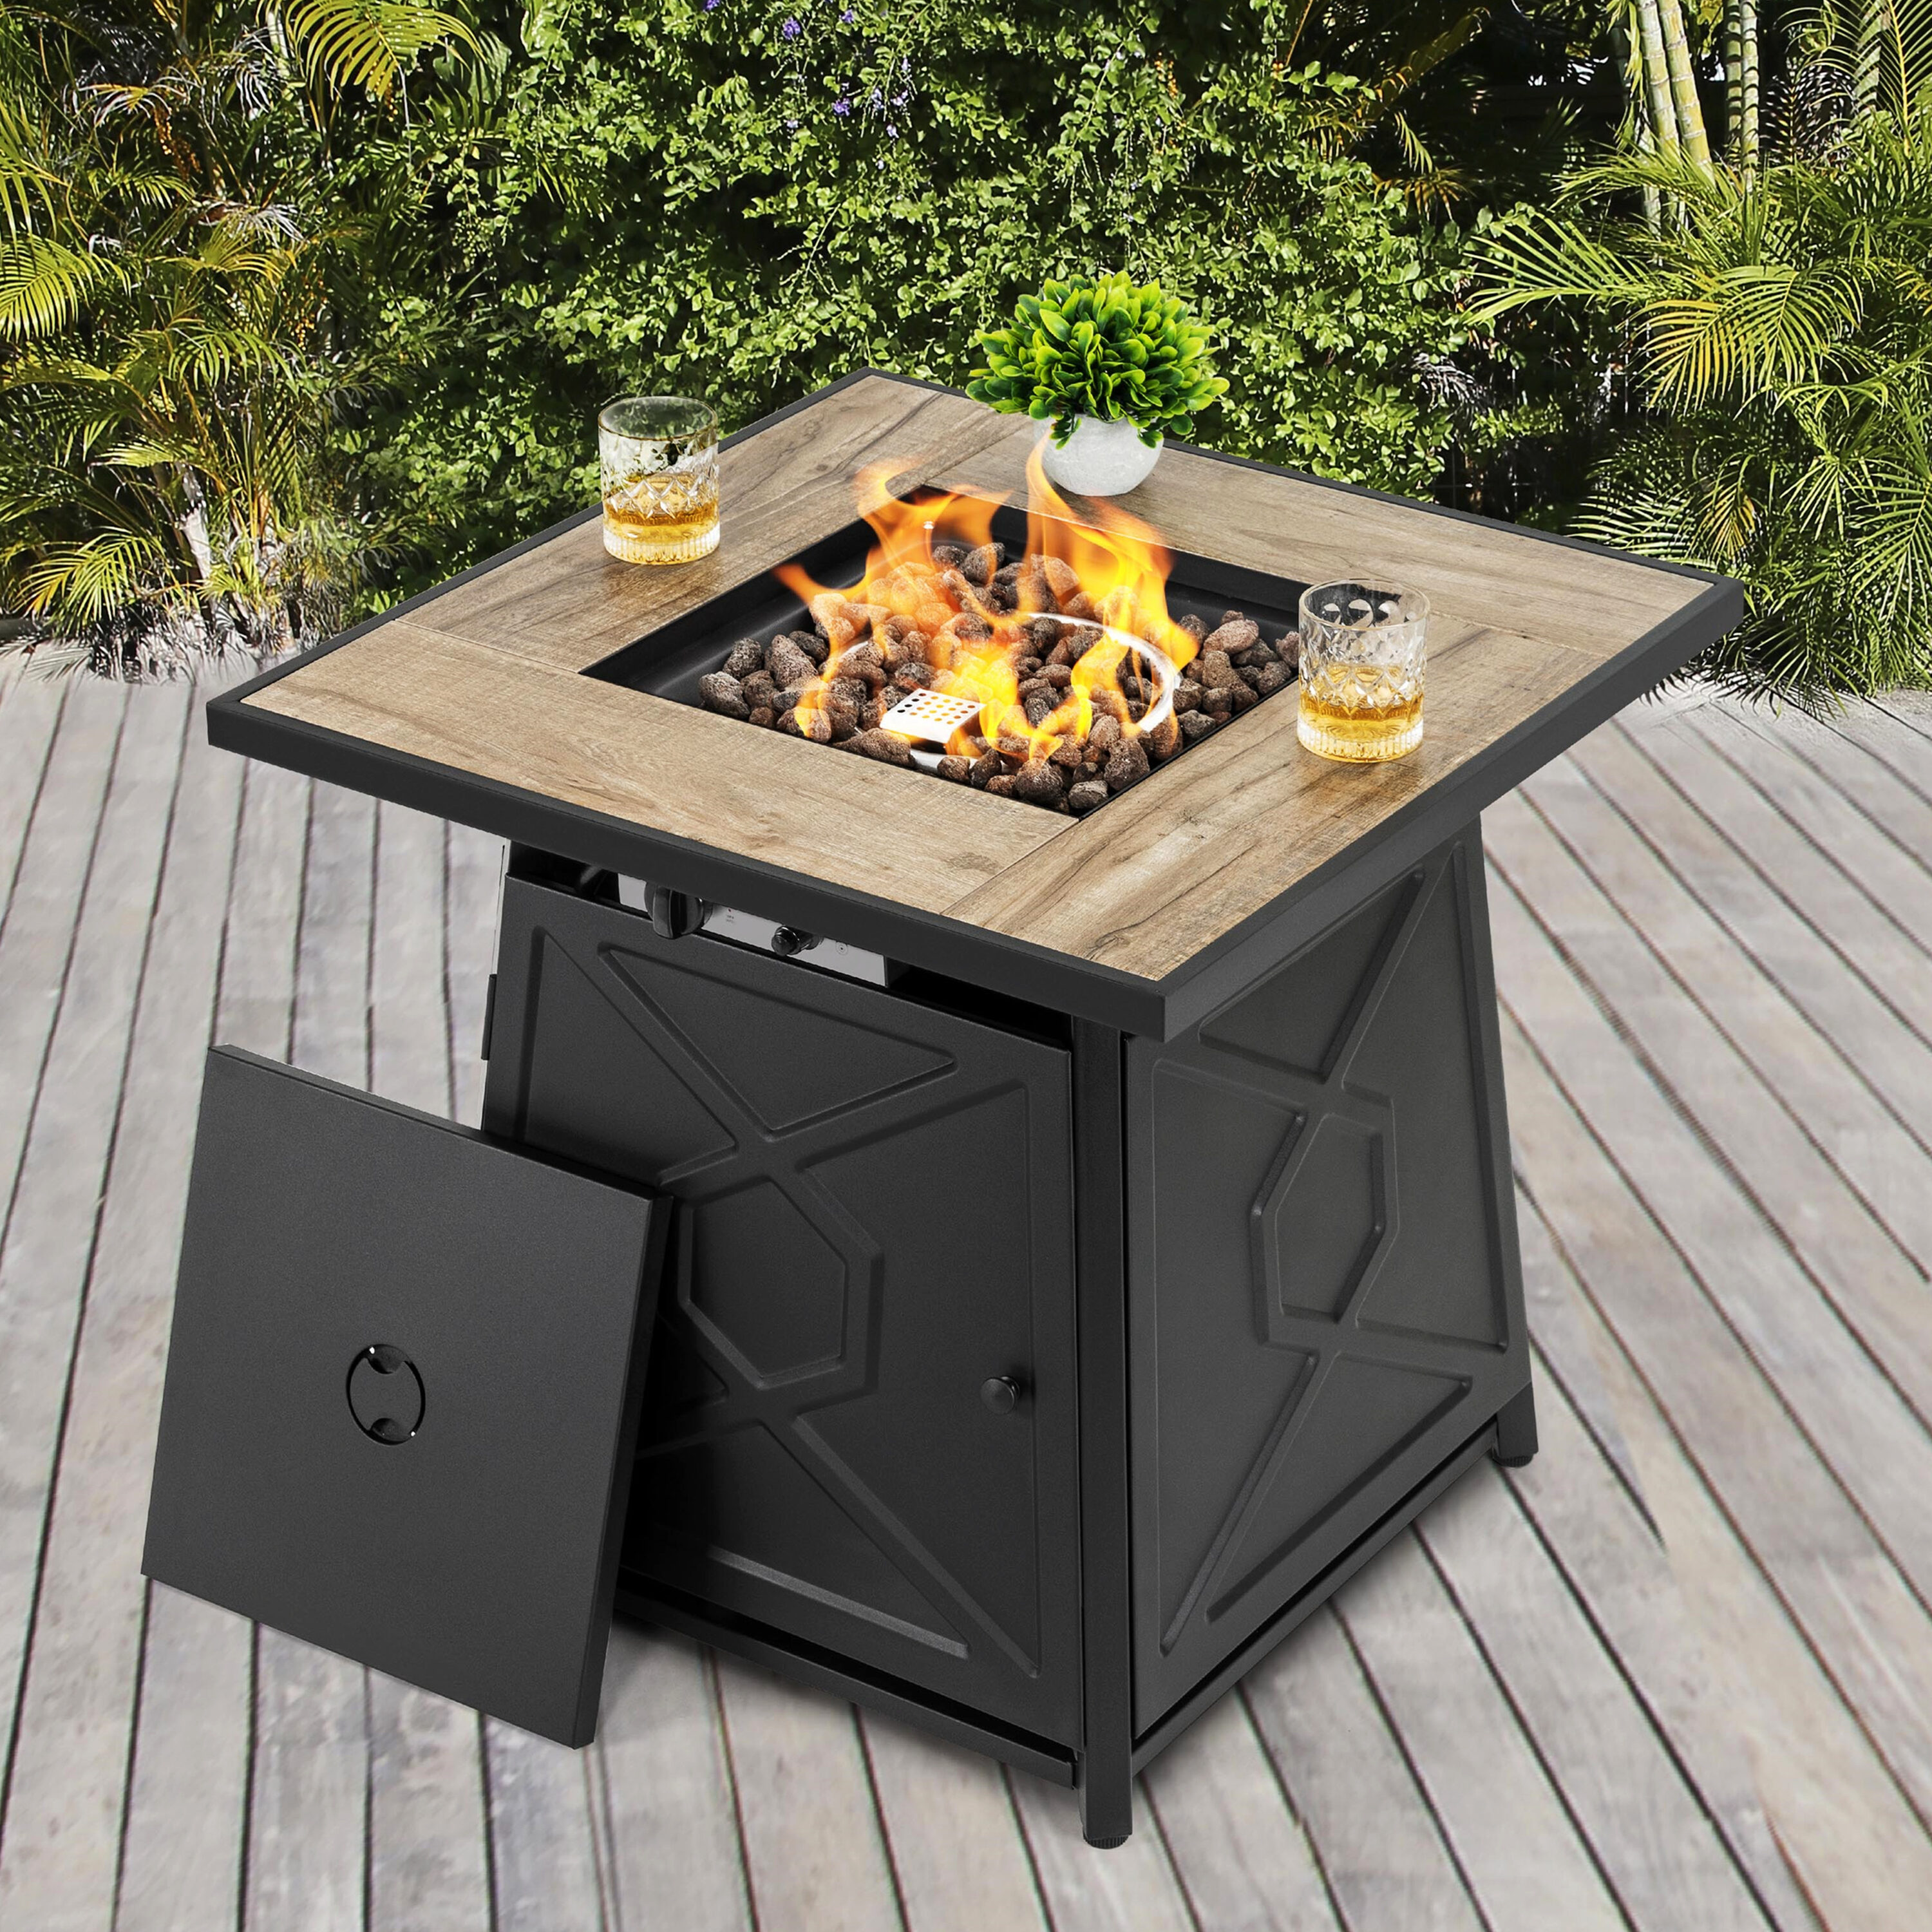 Nuu Garden Fire Pits & Patio Heaters at